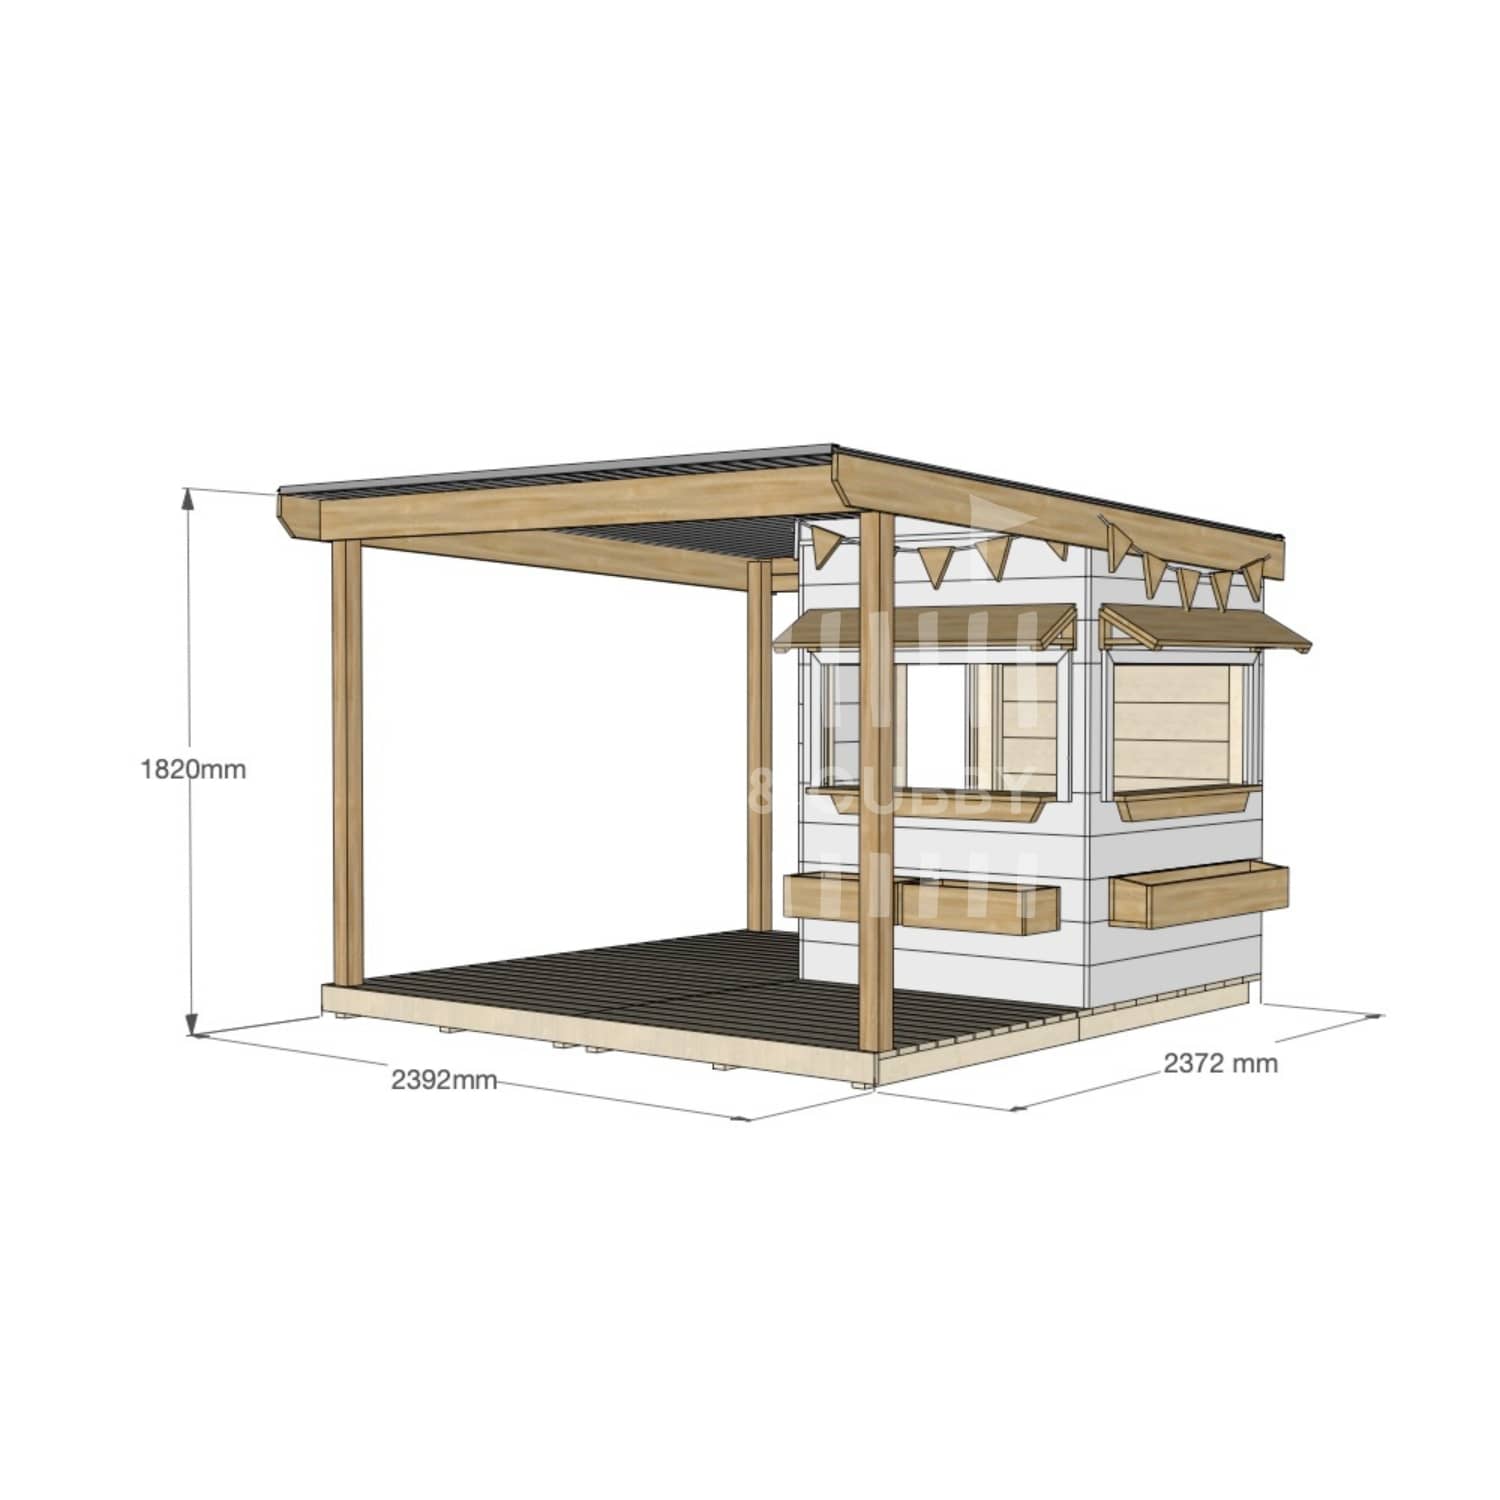 Commercial grade painted little square pine timber cubby house with wraparound verandah, accessories and dimensions